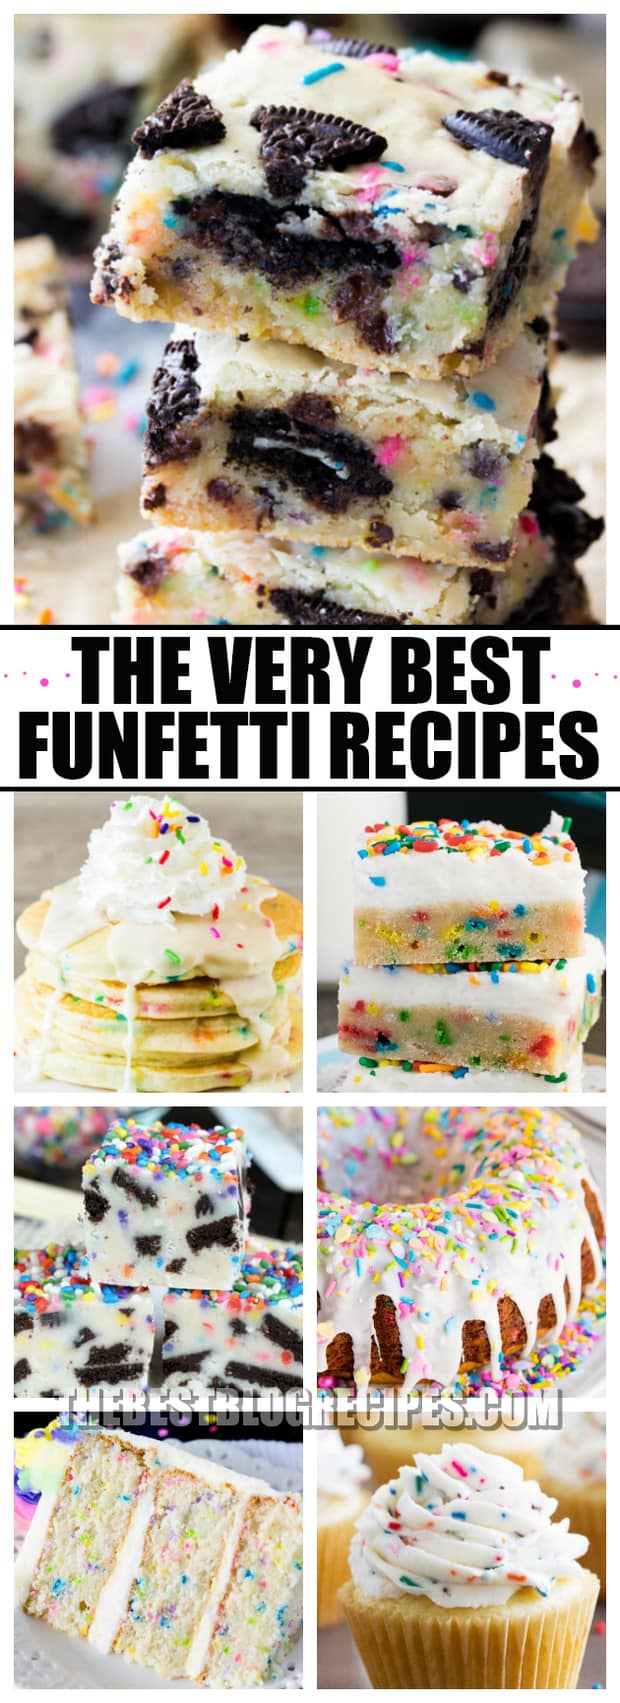 The Best Funfetti Recipes are perfect not only for your your friends and family birthday parties, but also just when you need a sweet, fun, and colorful treat!